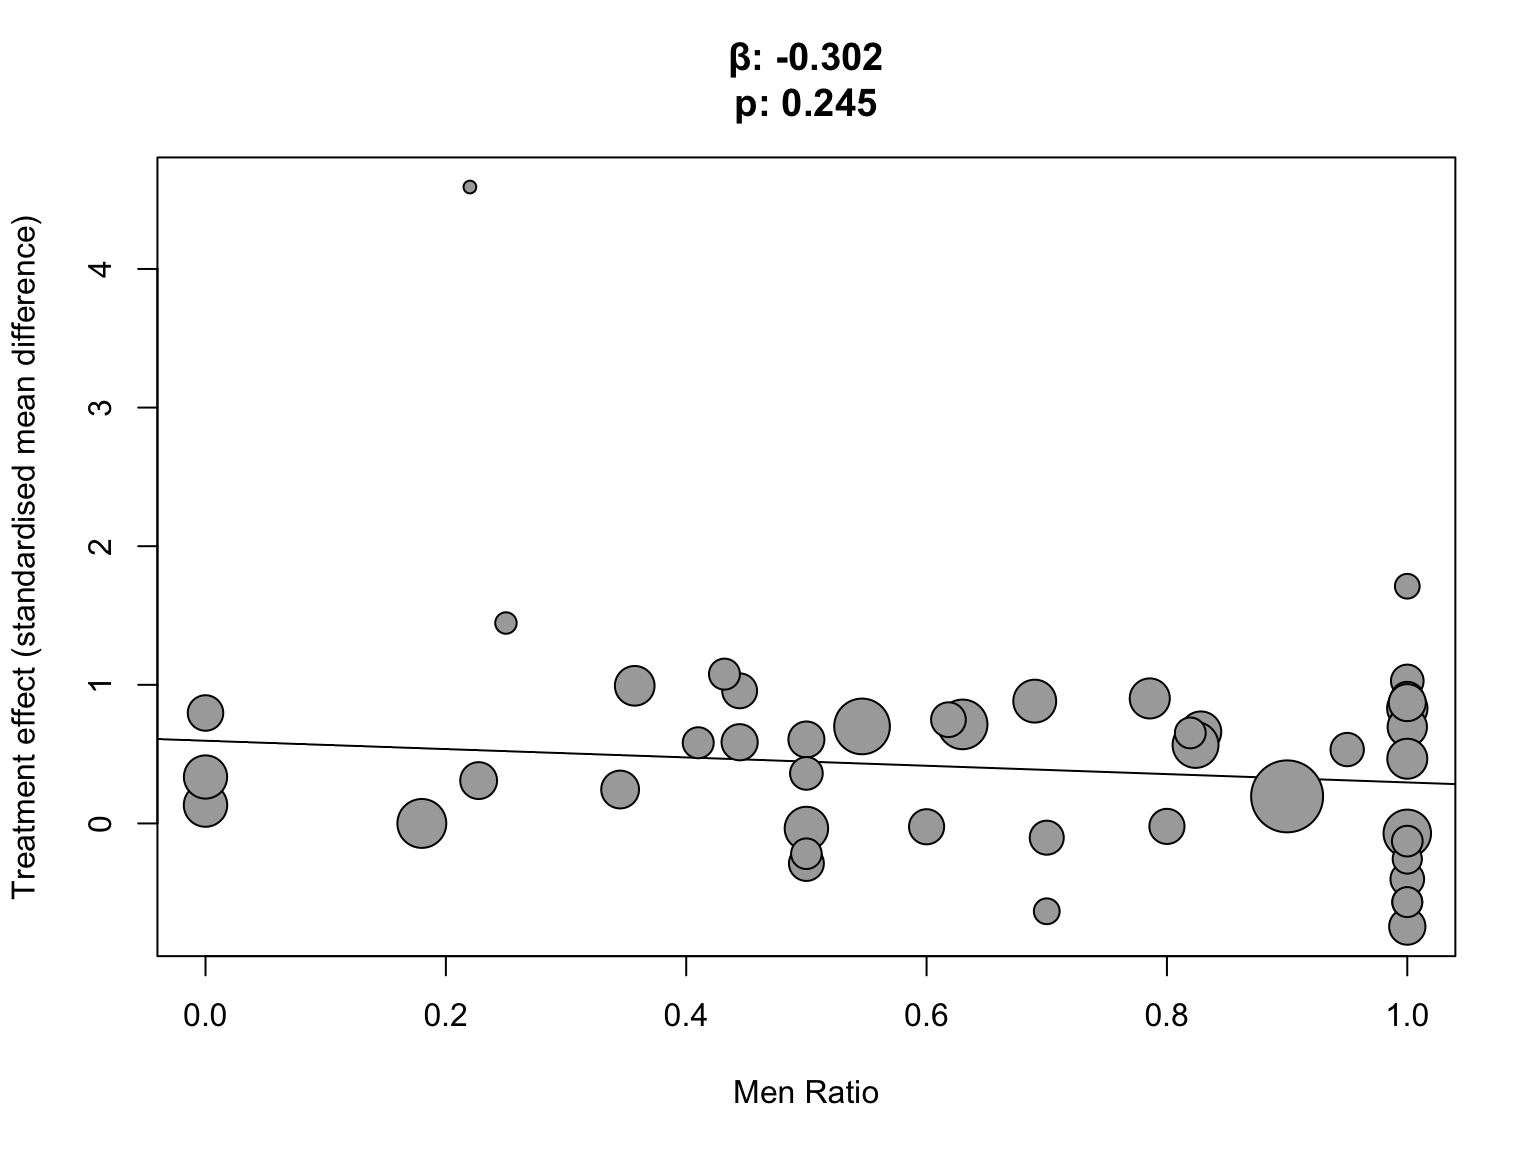 Bubble plot for the meta-regression for the subgroup analysis. The slope of the meta-regression (β) as well as the associated p-value are printed at the top of the graph.